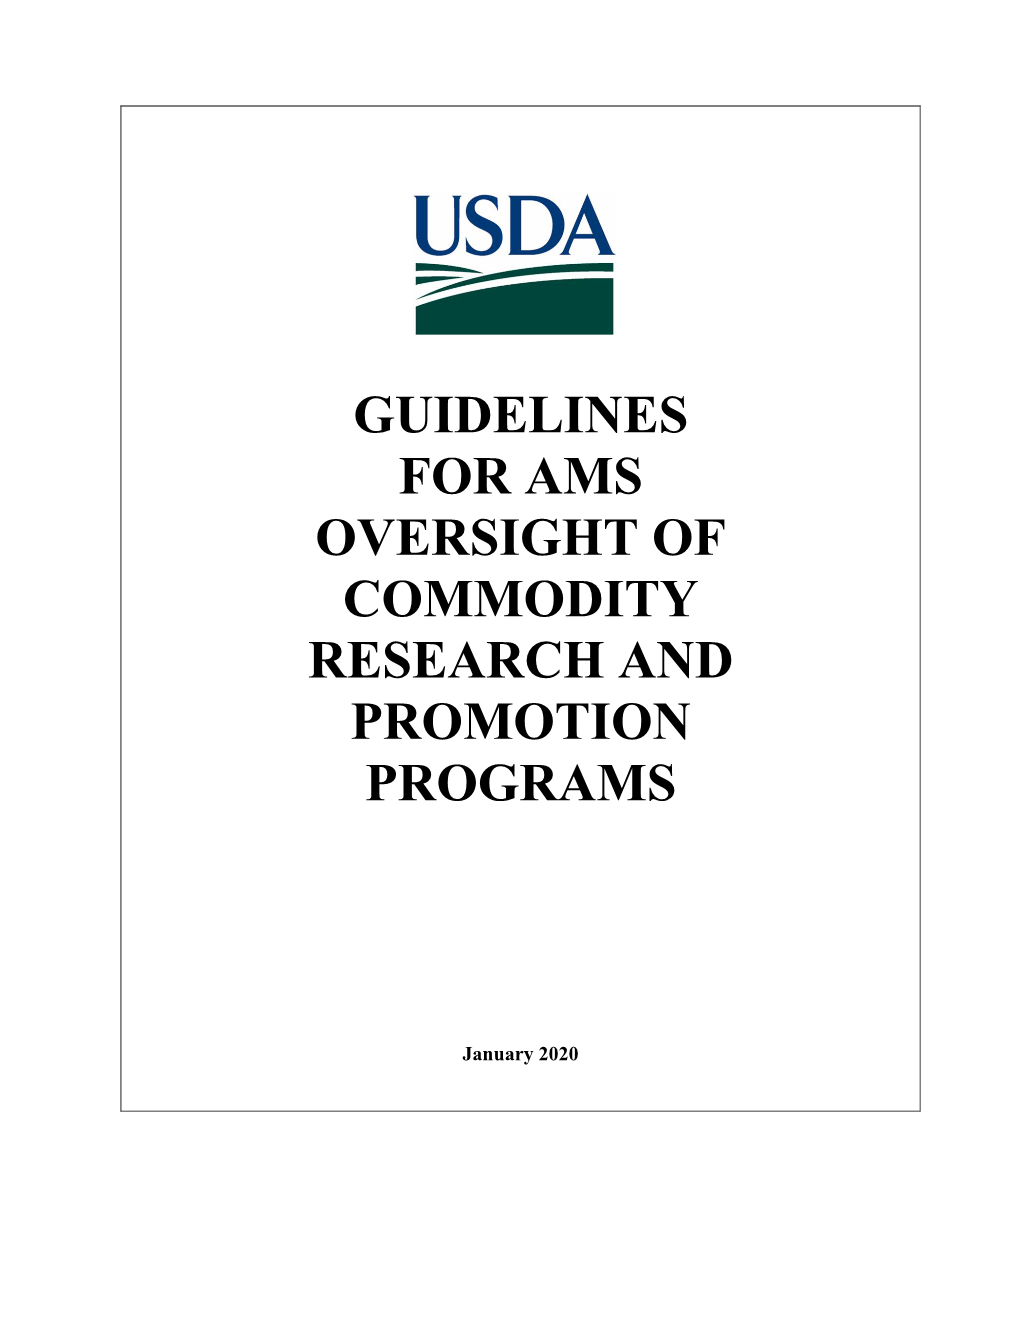 Guidelines for Ams Oversight of Commodity Research and Promotion Programs